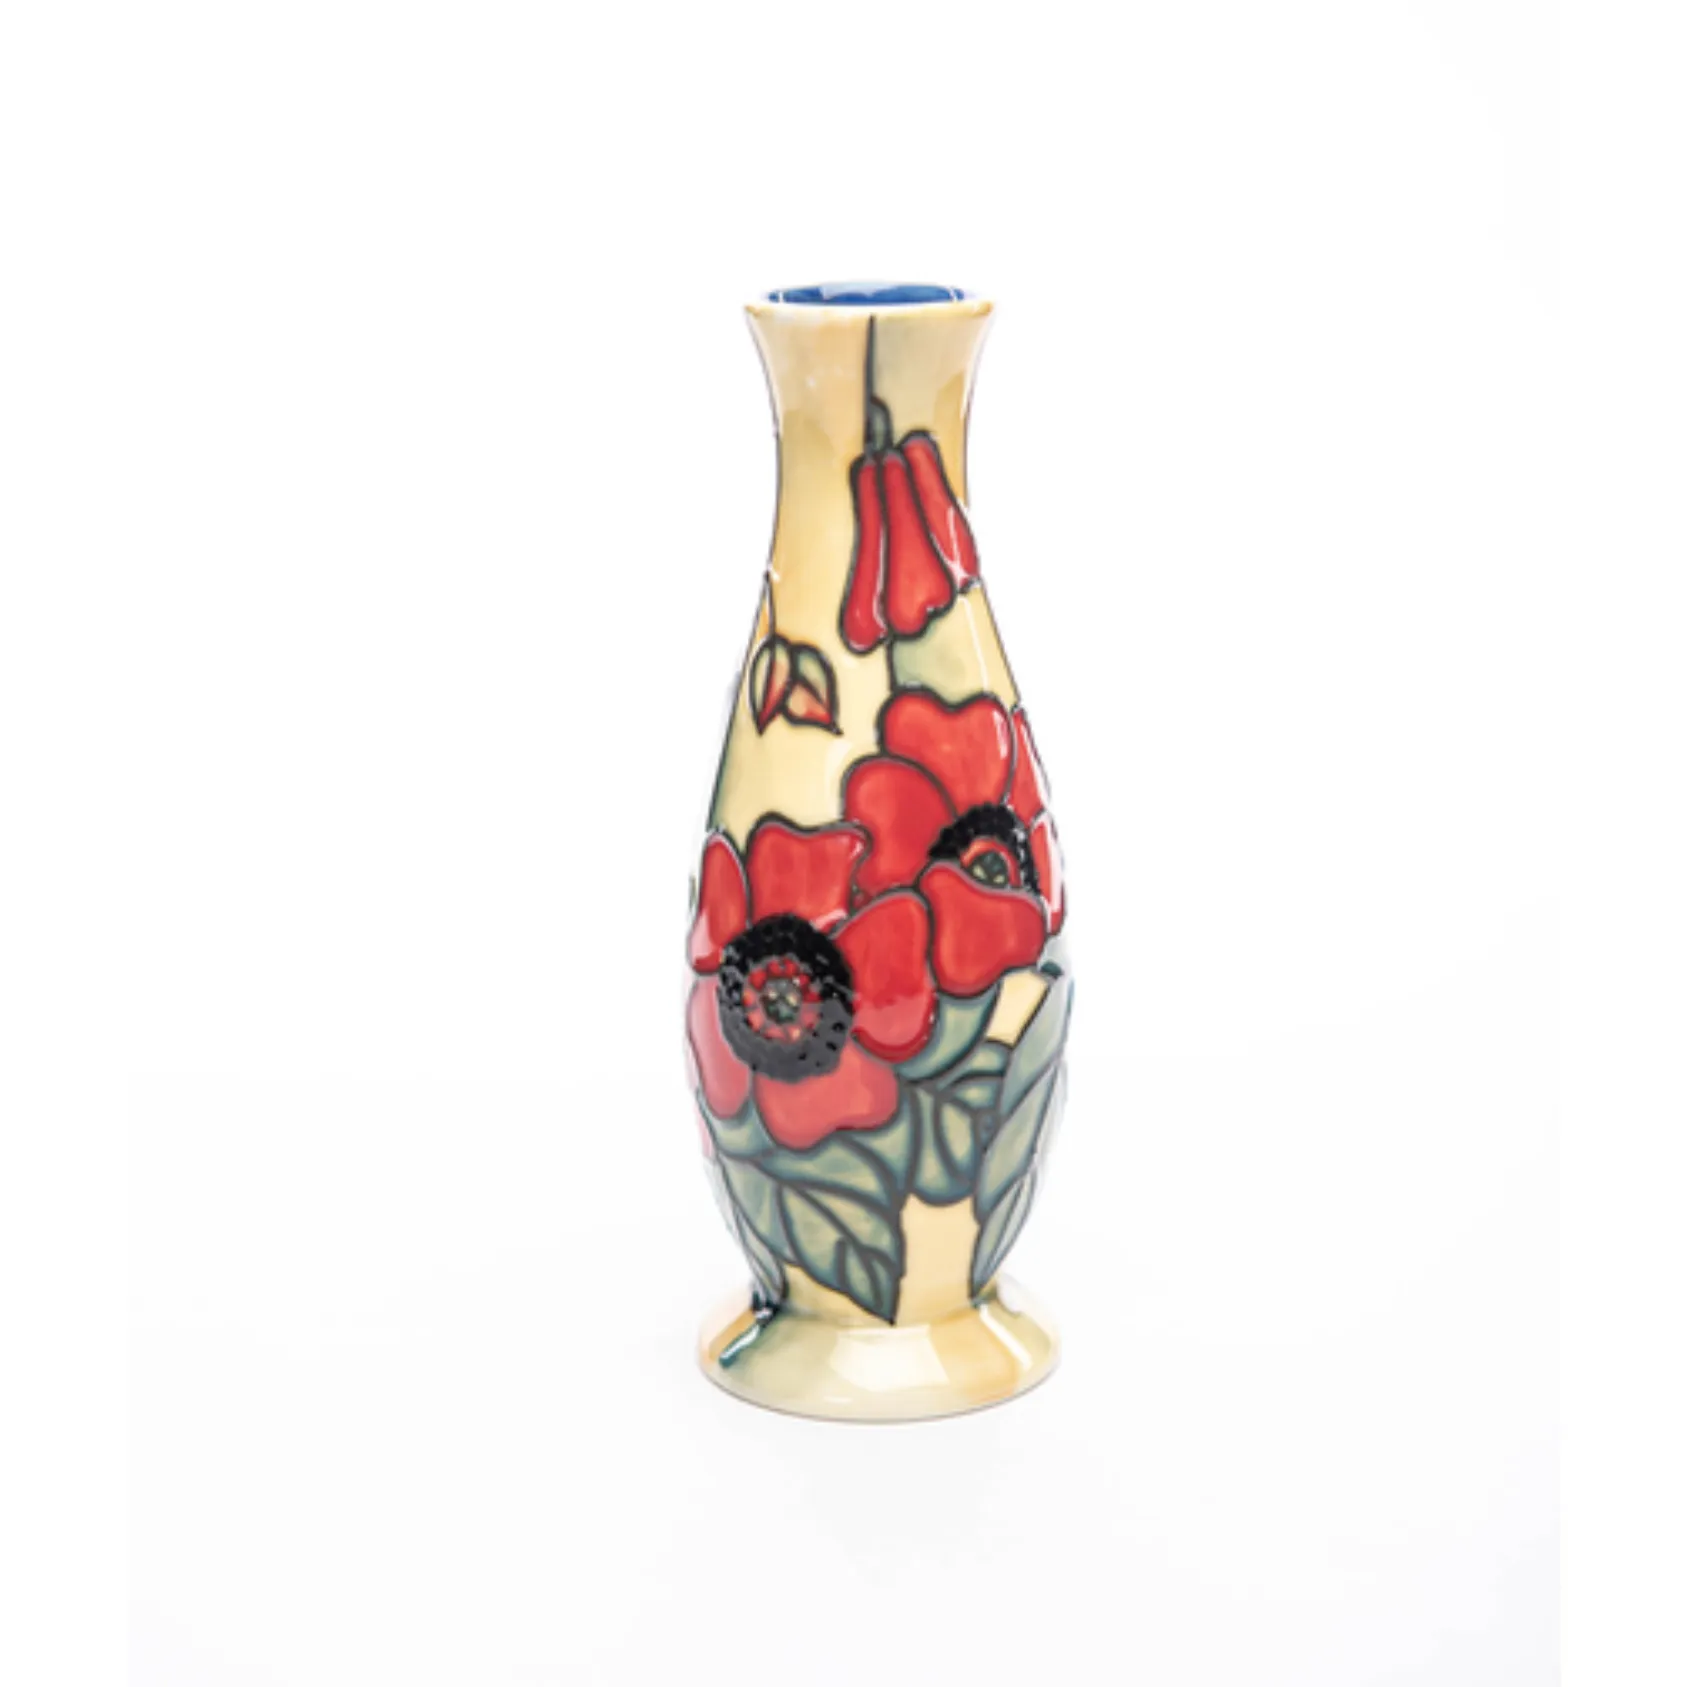 yellow cream background and bold red poppy on this small flower vase